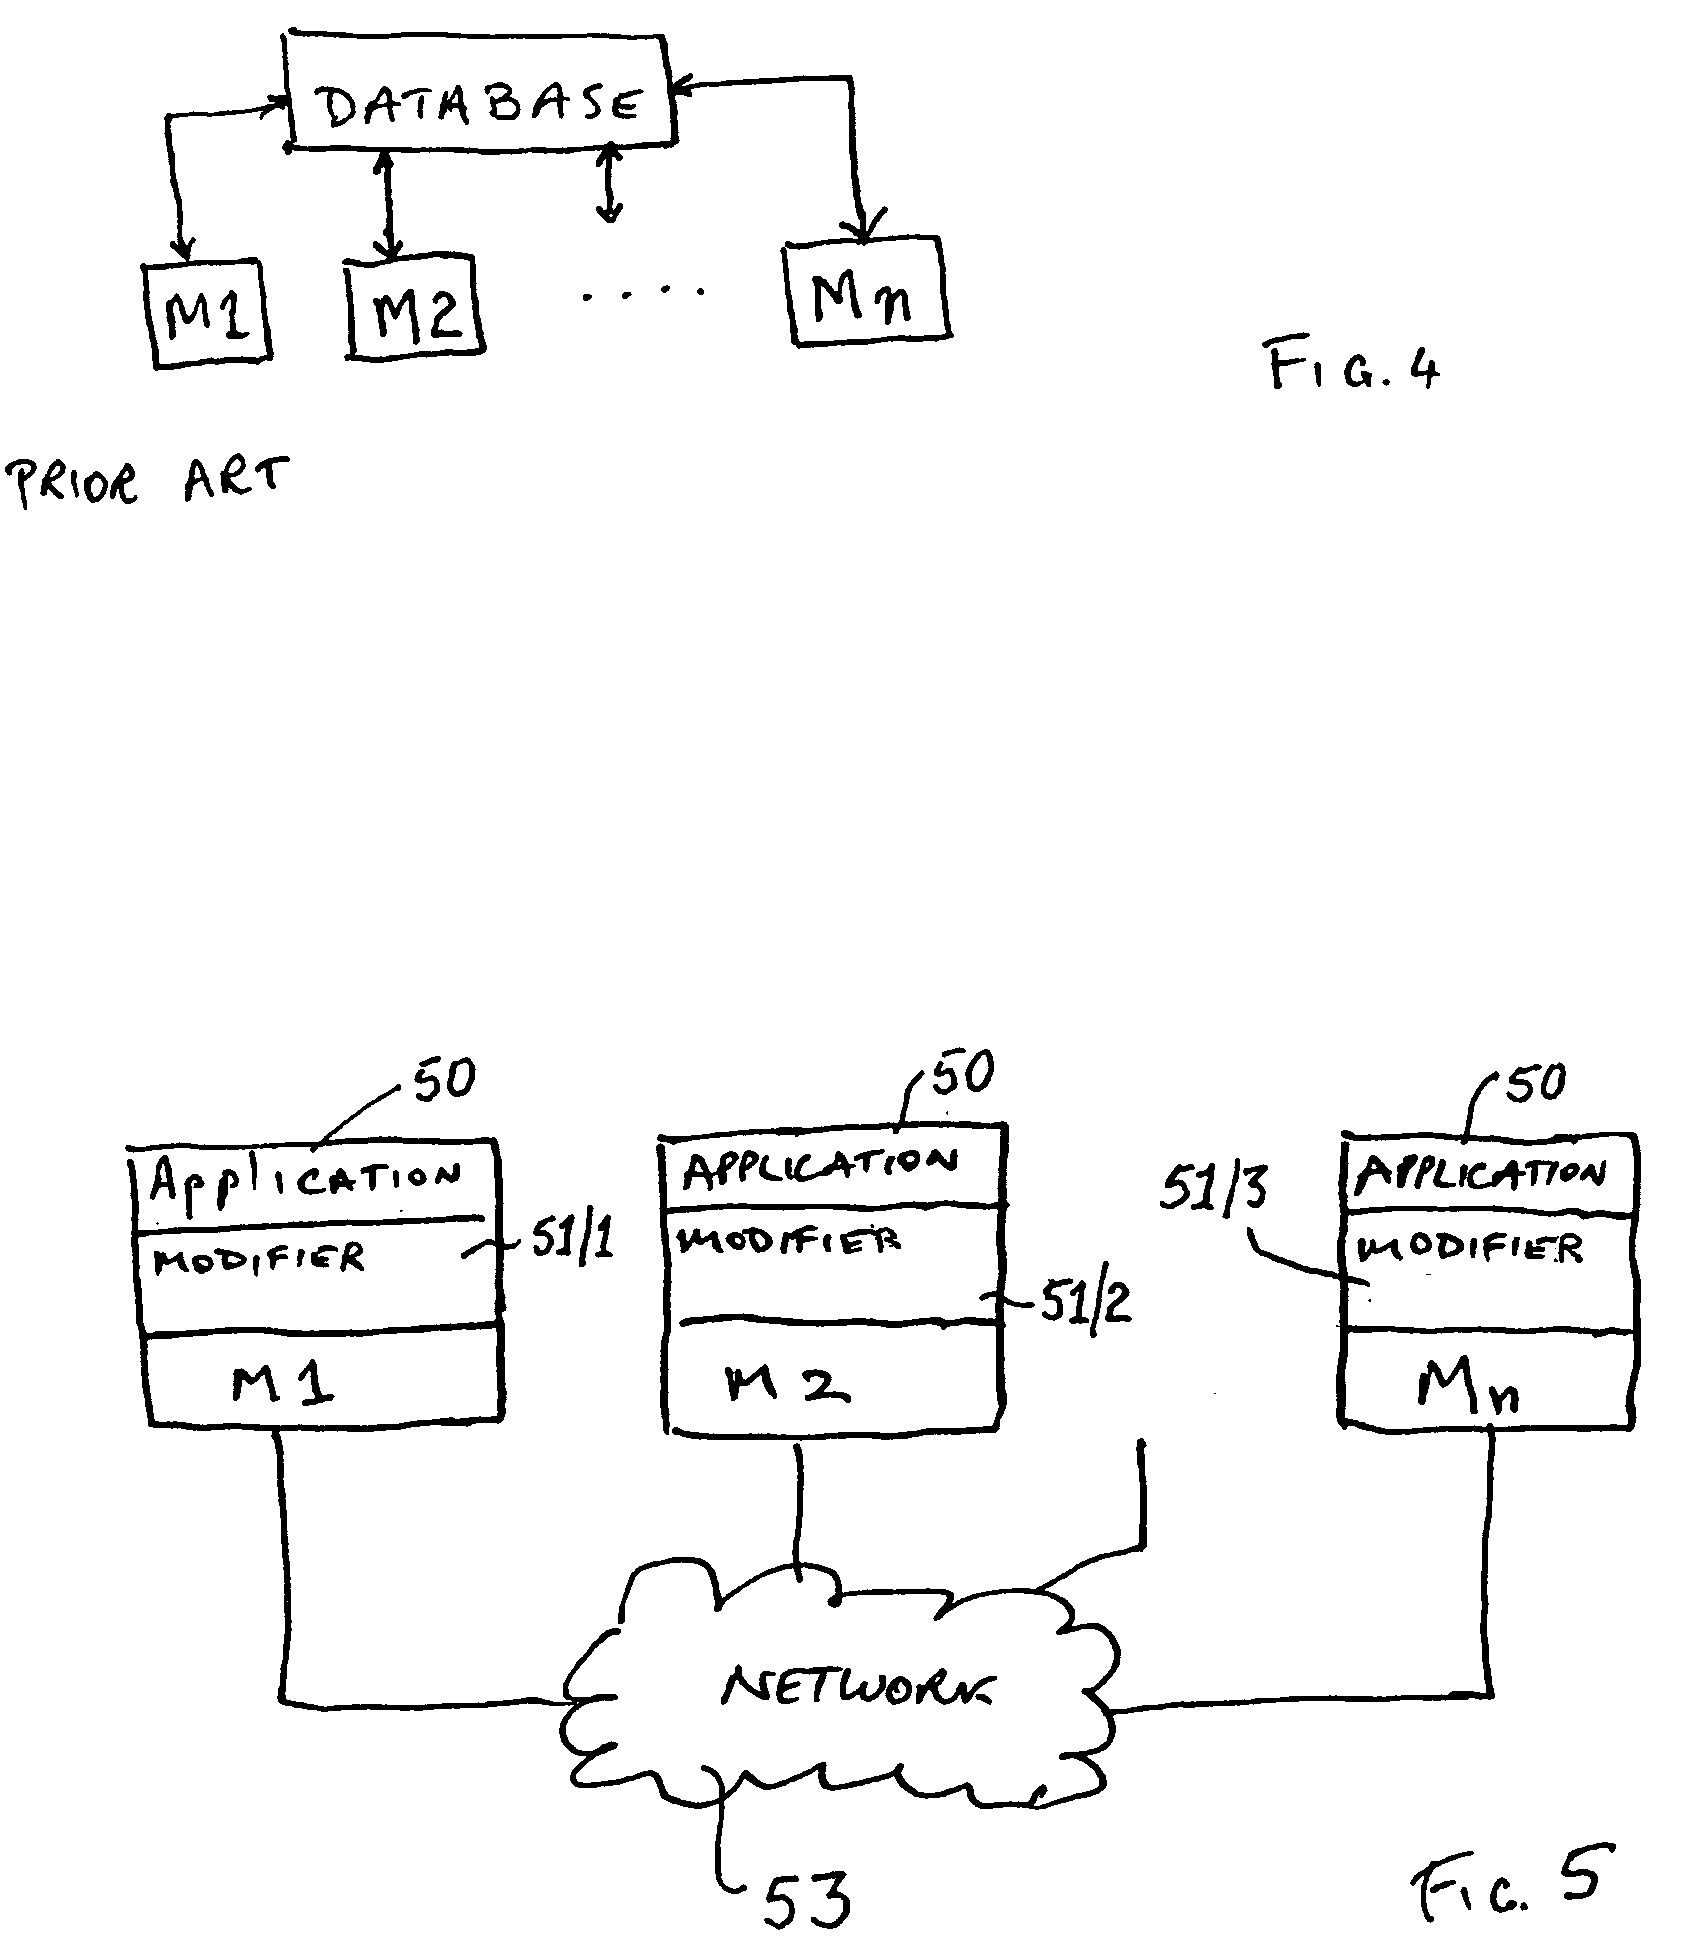 Modified computer architecture with coordinated objects